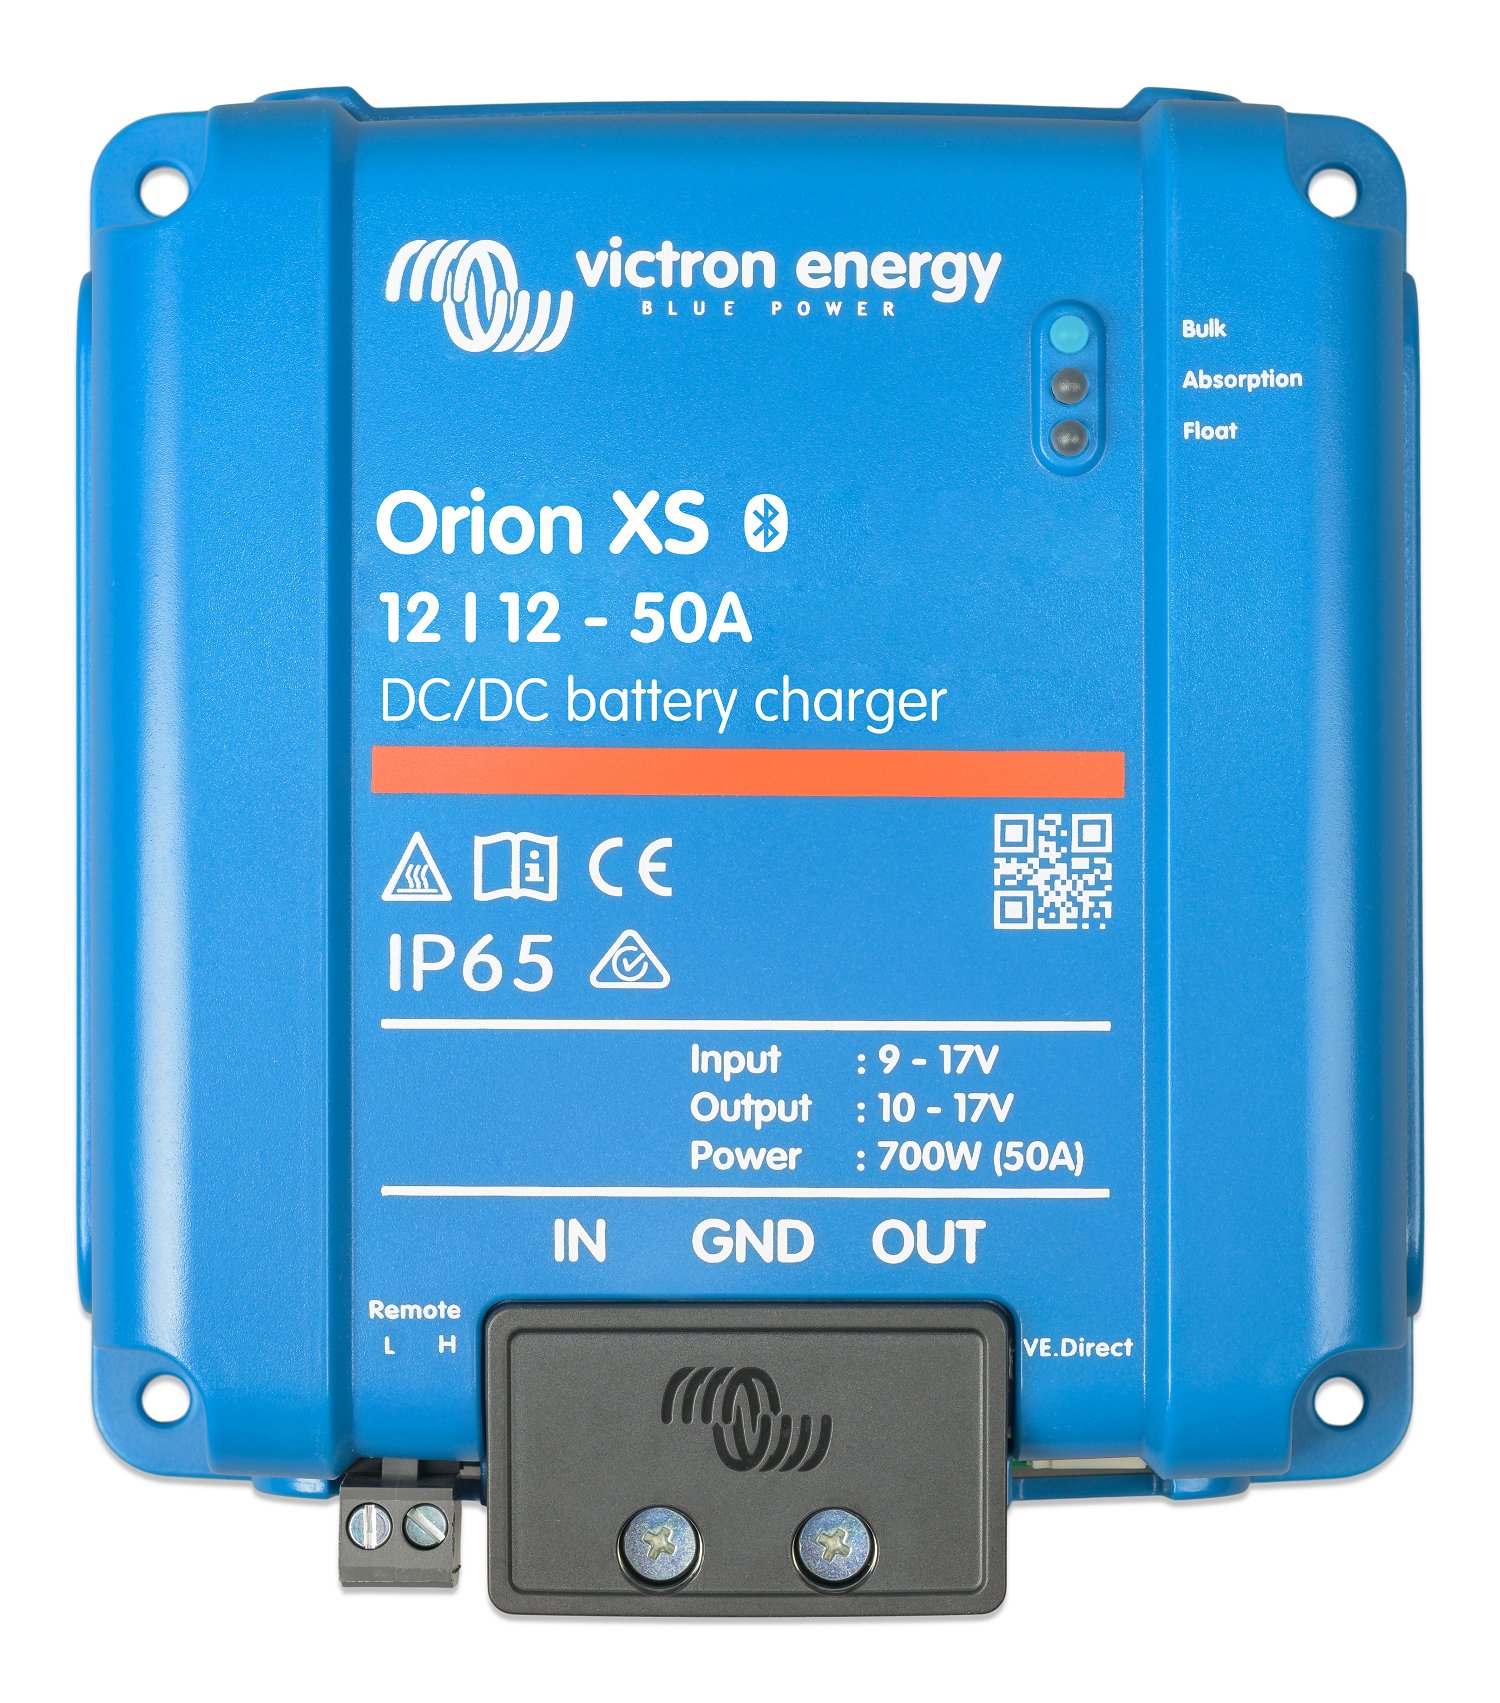 Does the Victron Orion XS allow independent IO current programming?